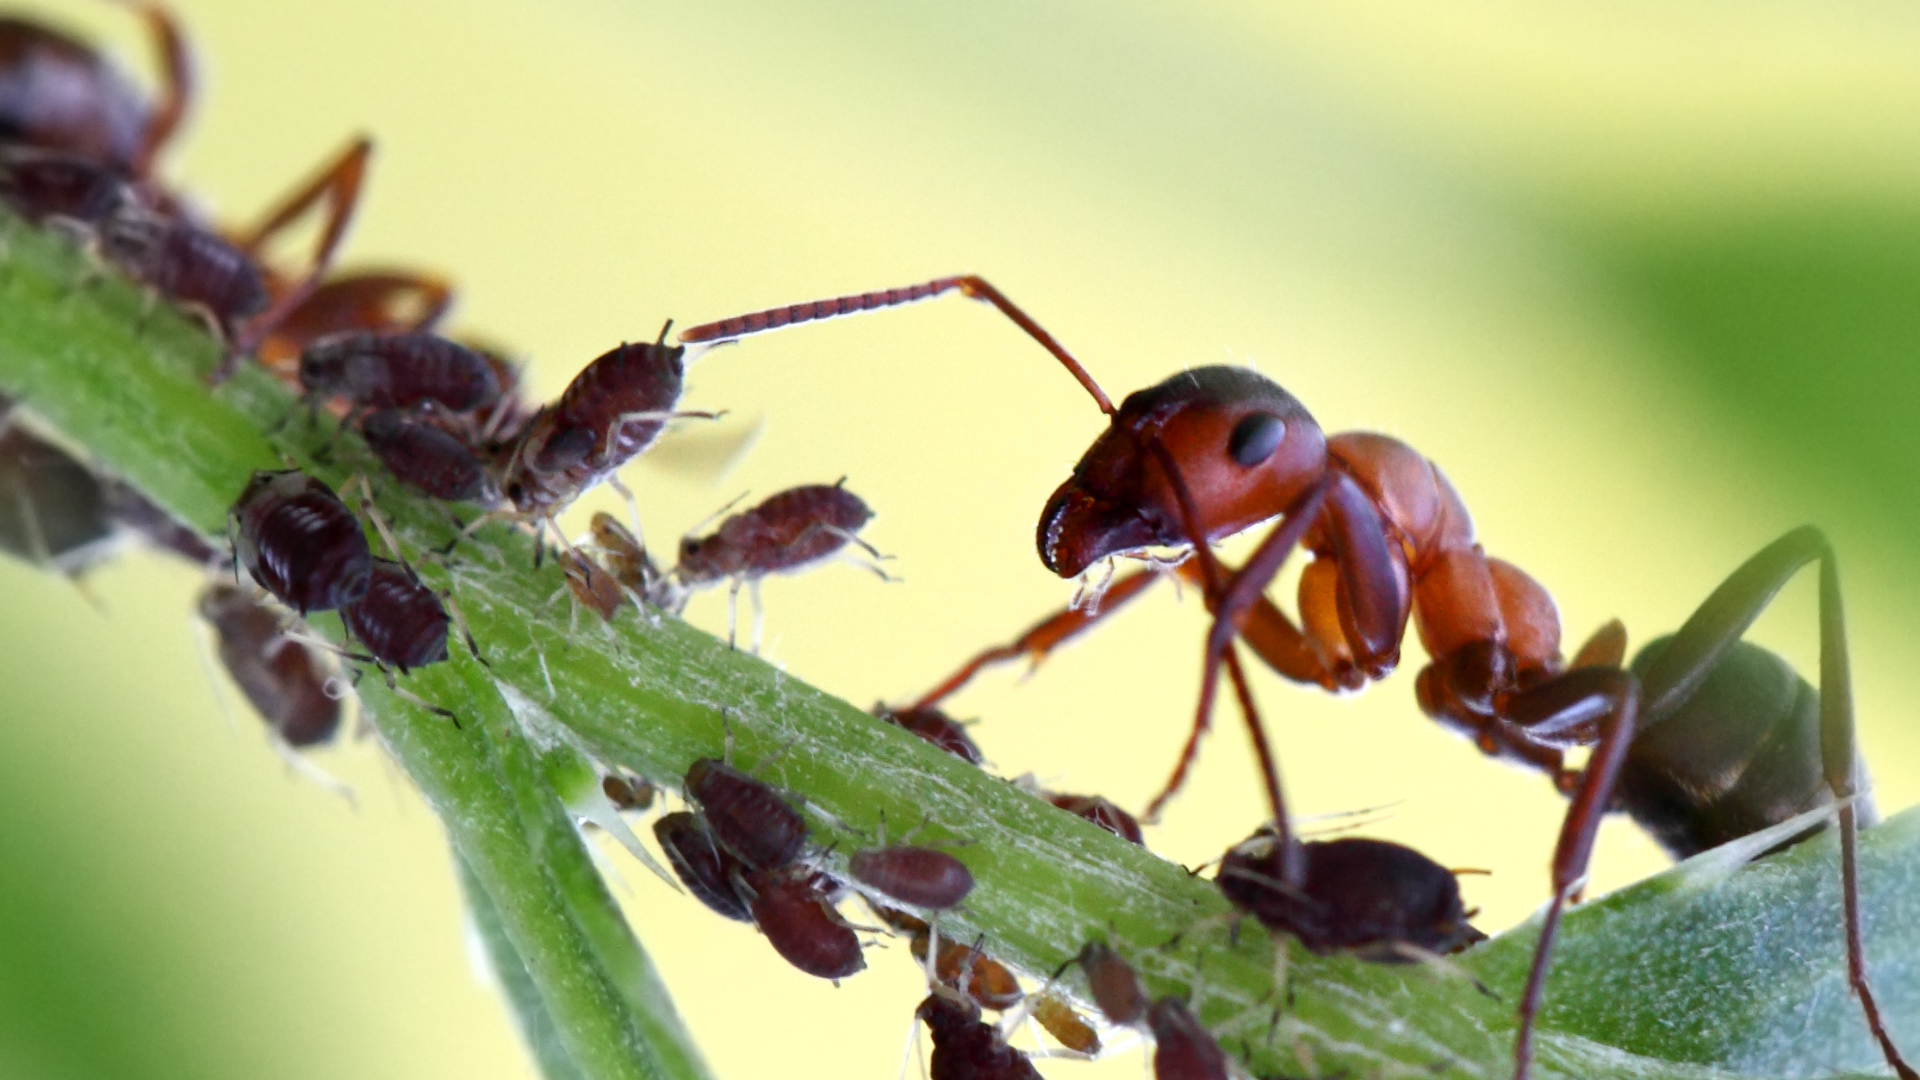 Close up of ants climbing on plant